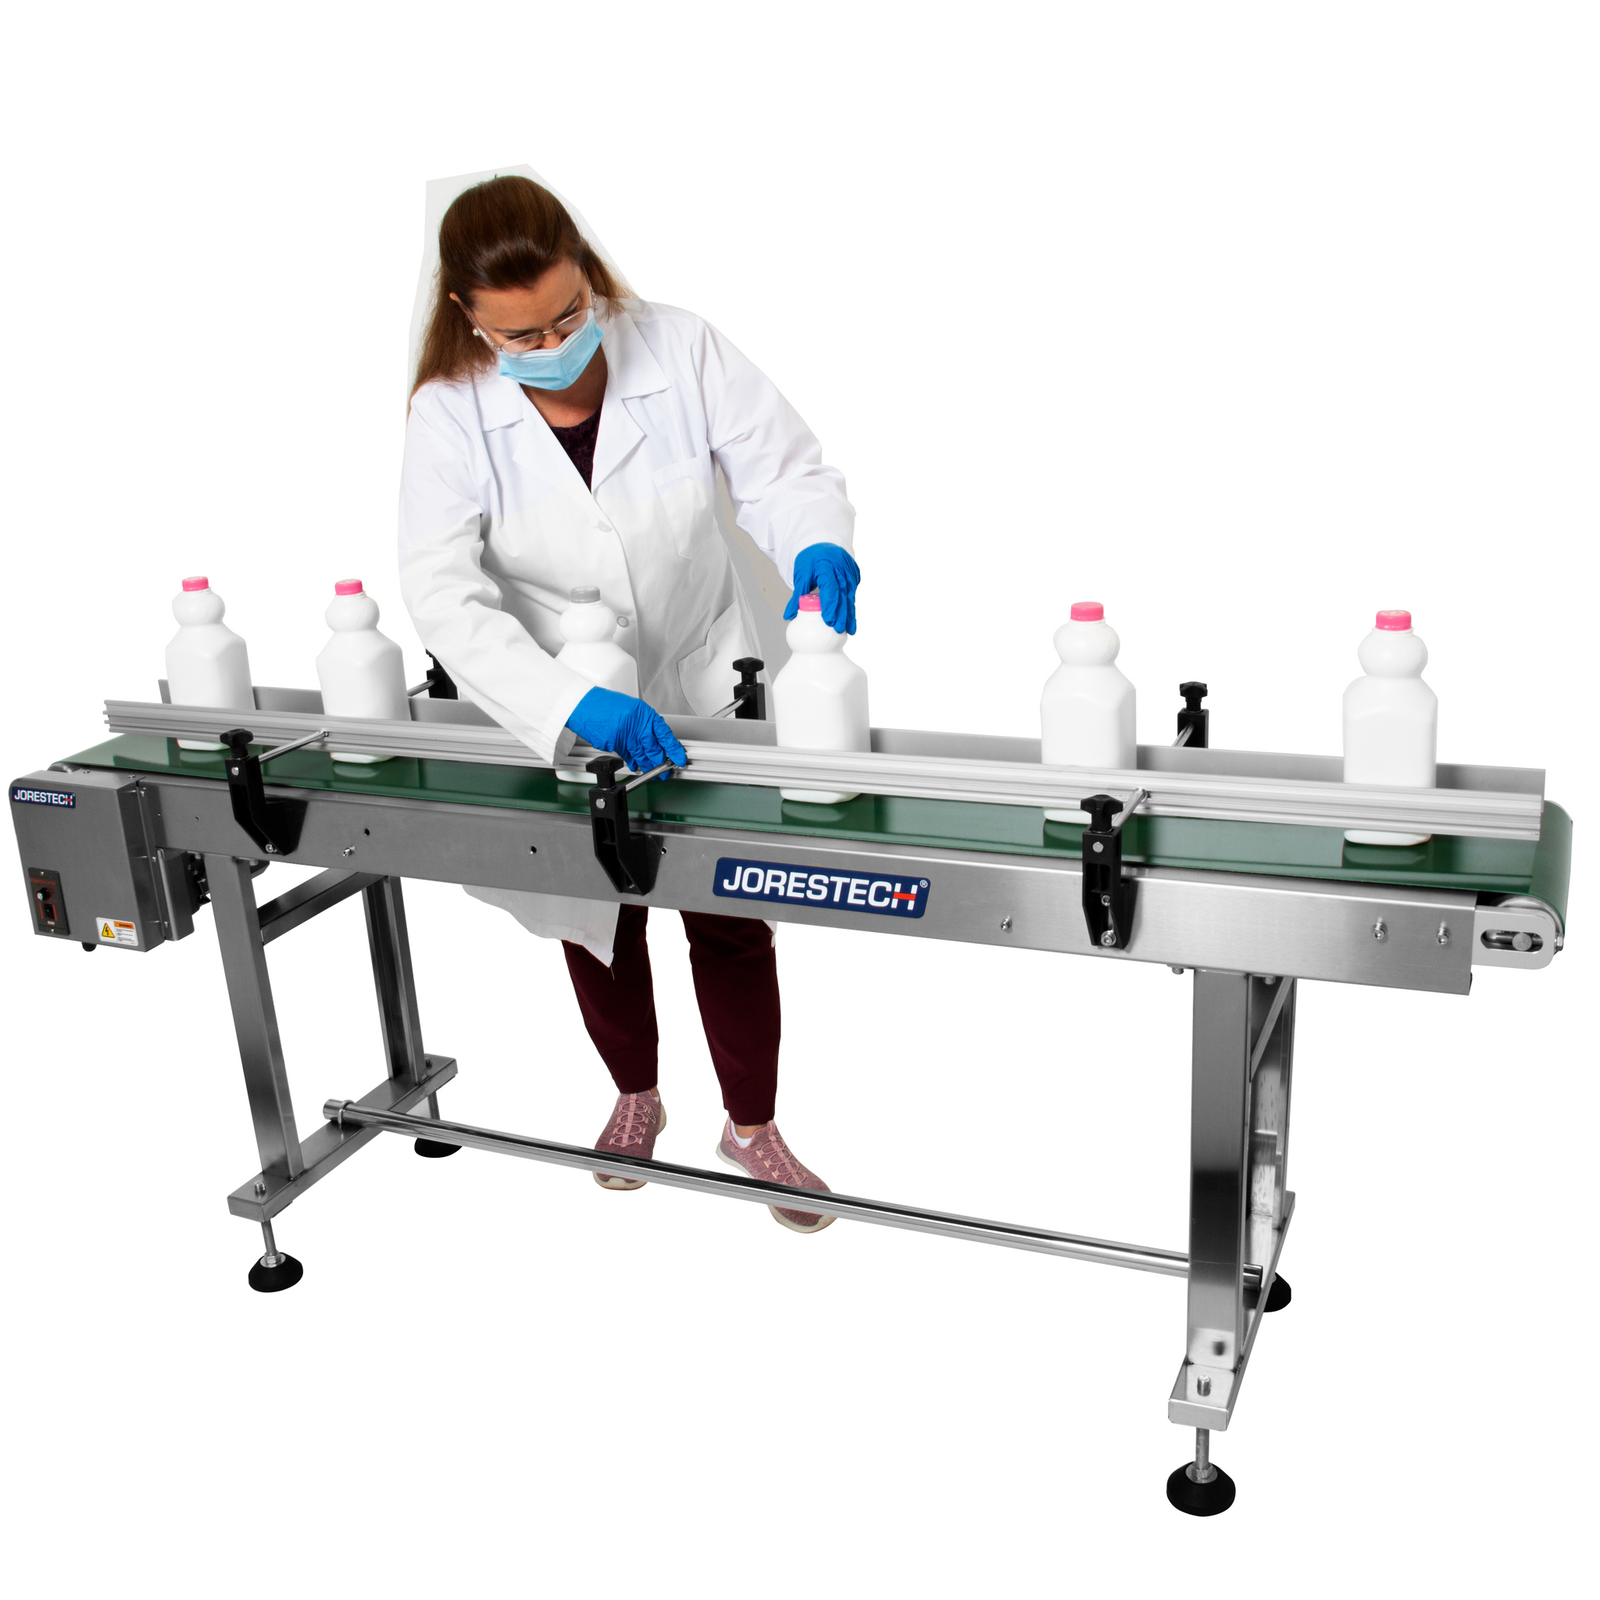 brunette woman wearing white lab coat and blue gloves adjusting white milk bottles on motorized conveyor with steel frame and green belt that features side guard rails